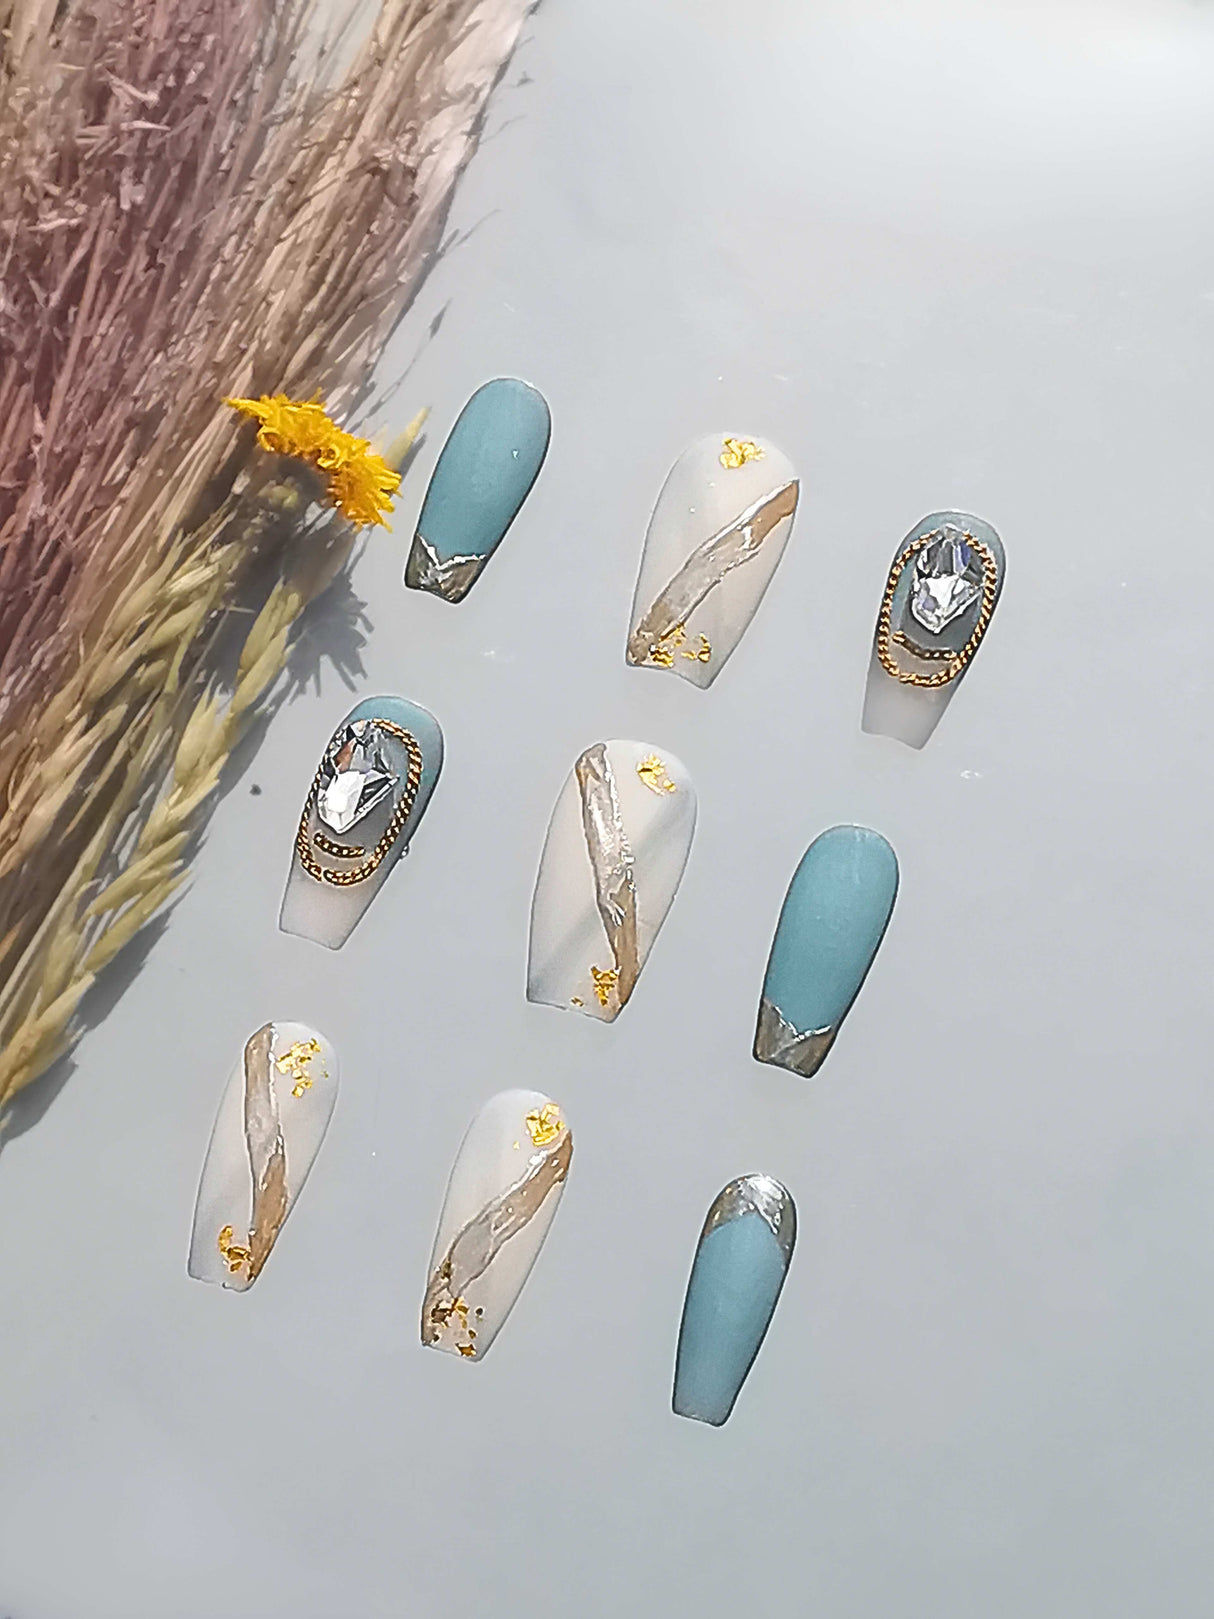 These acrylic nails with trendy designs, gold foil accents, and jeweled embellishments. The muted blue and natural tones with different finishes add a delicate aesthetic.